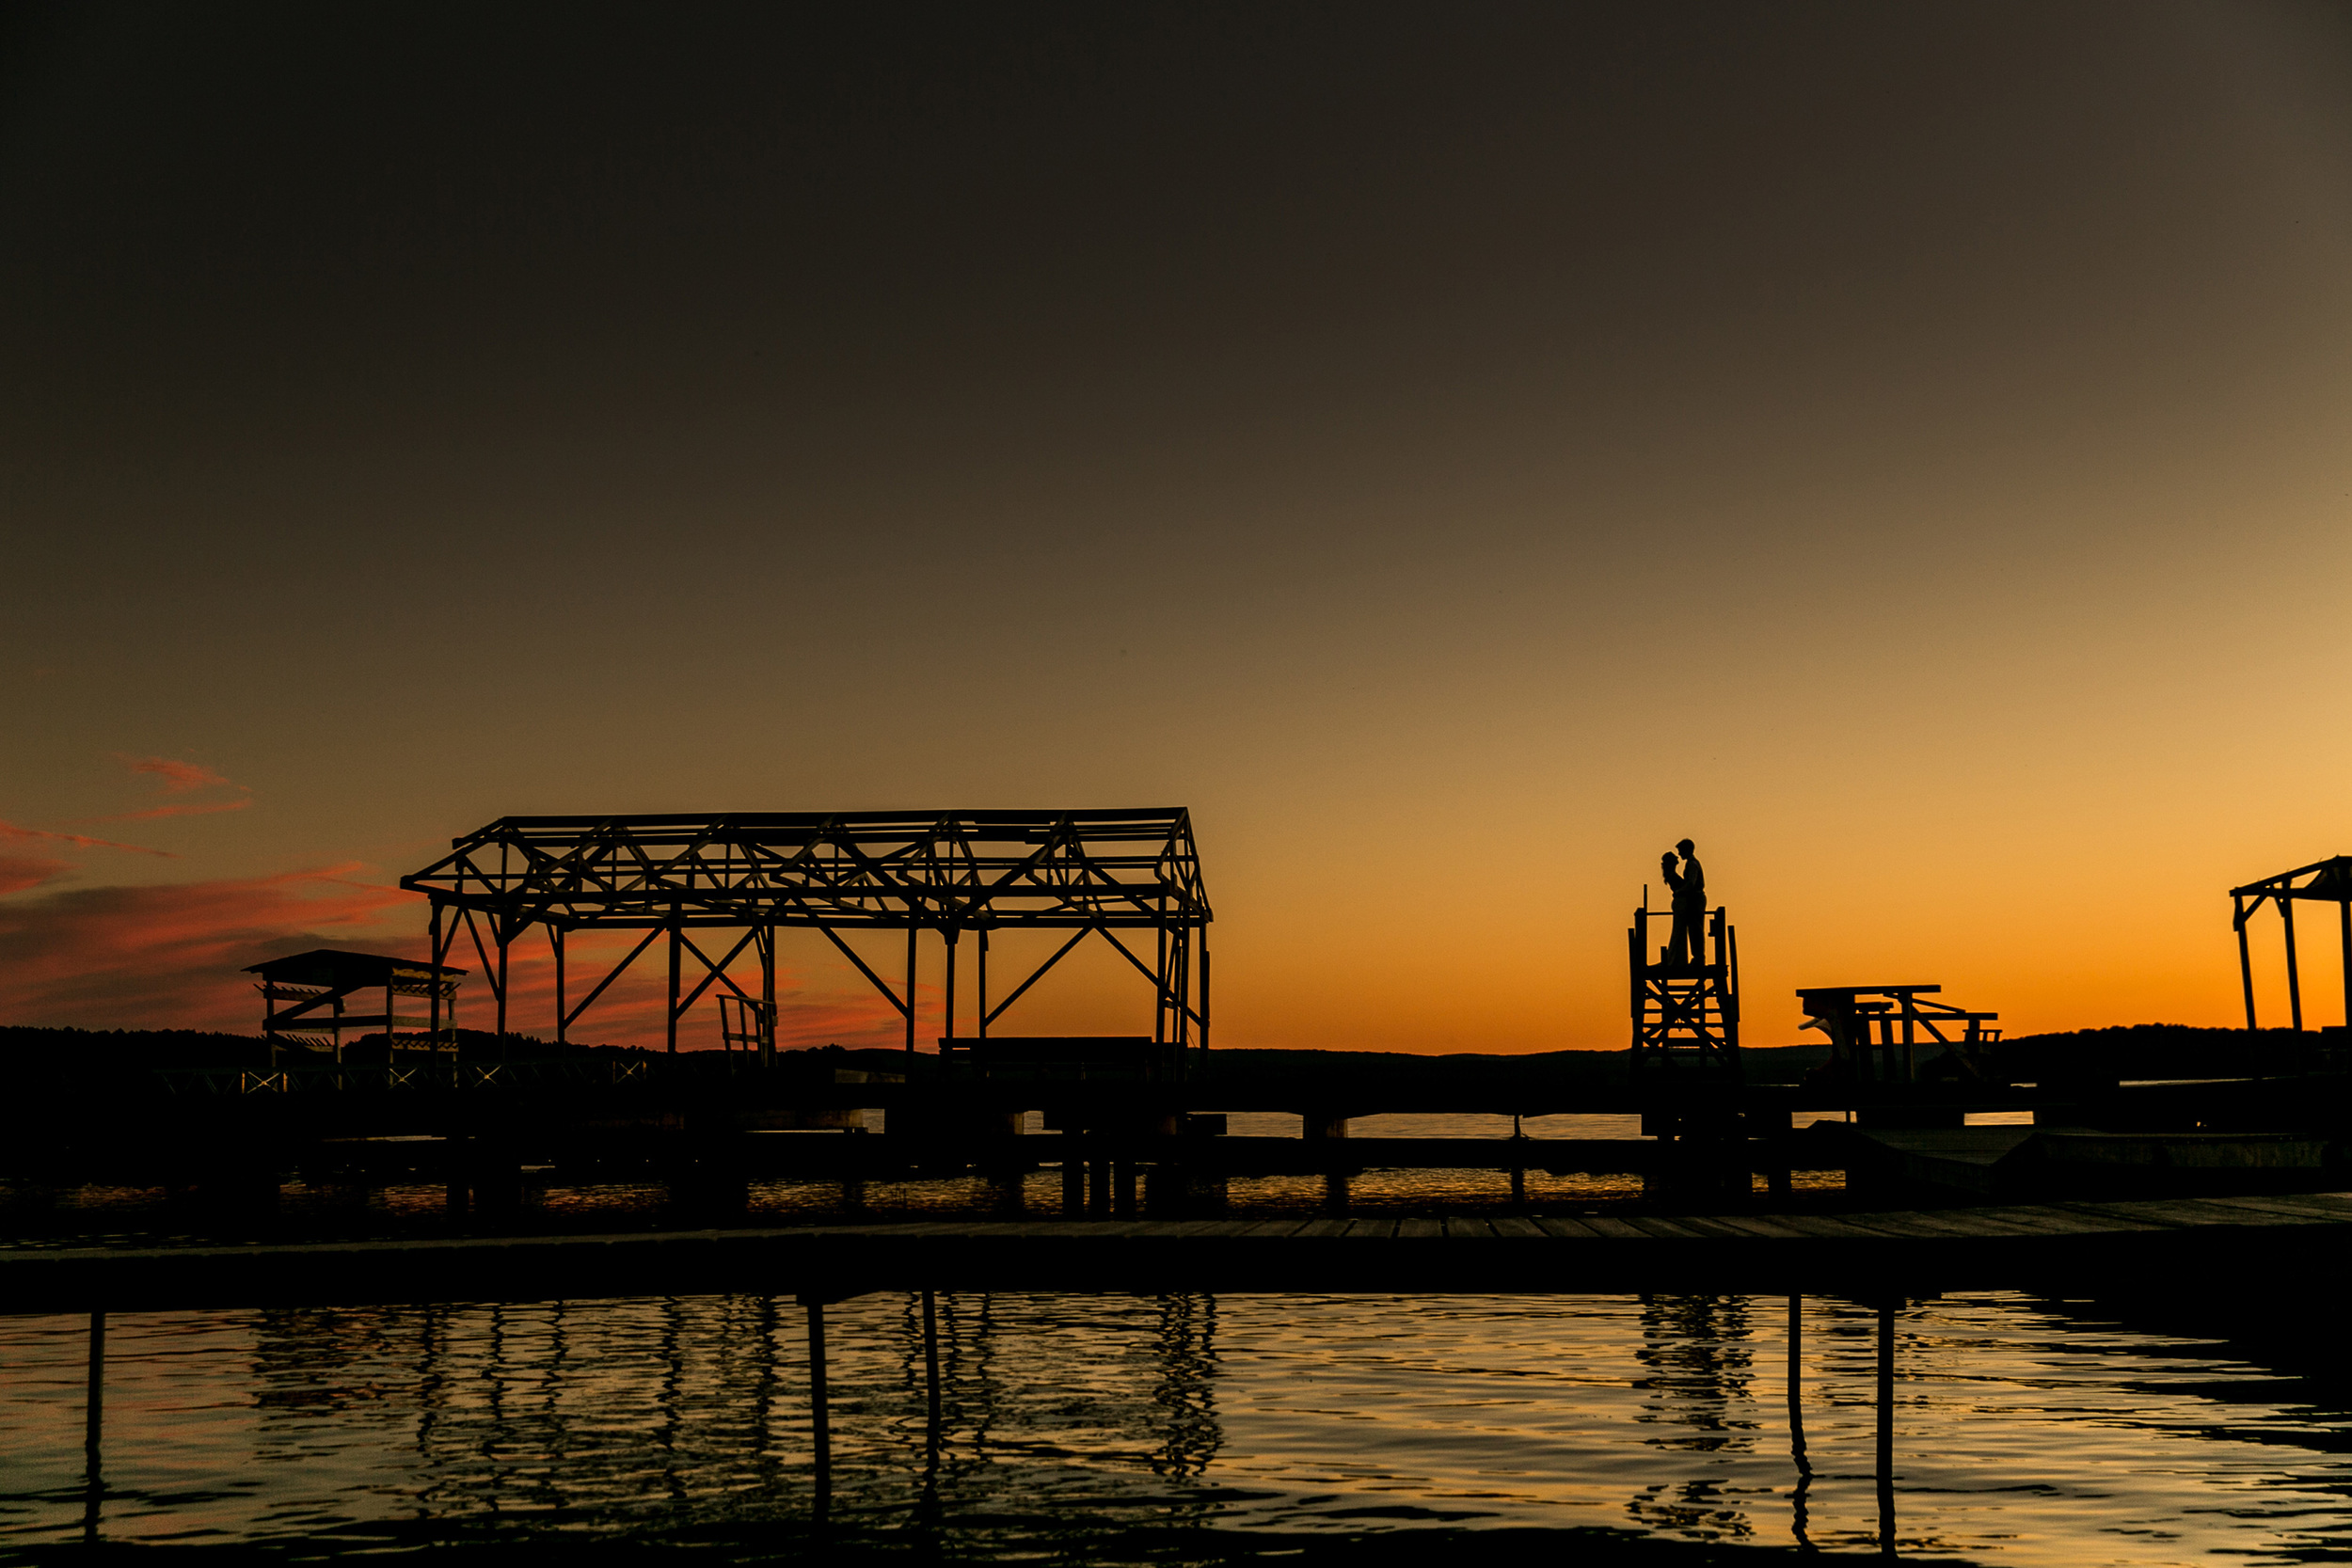 Bride and groom silhouette portrait during sunset on a lakeside dock (Copy)